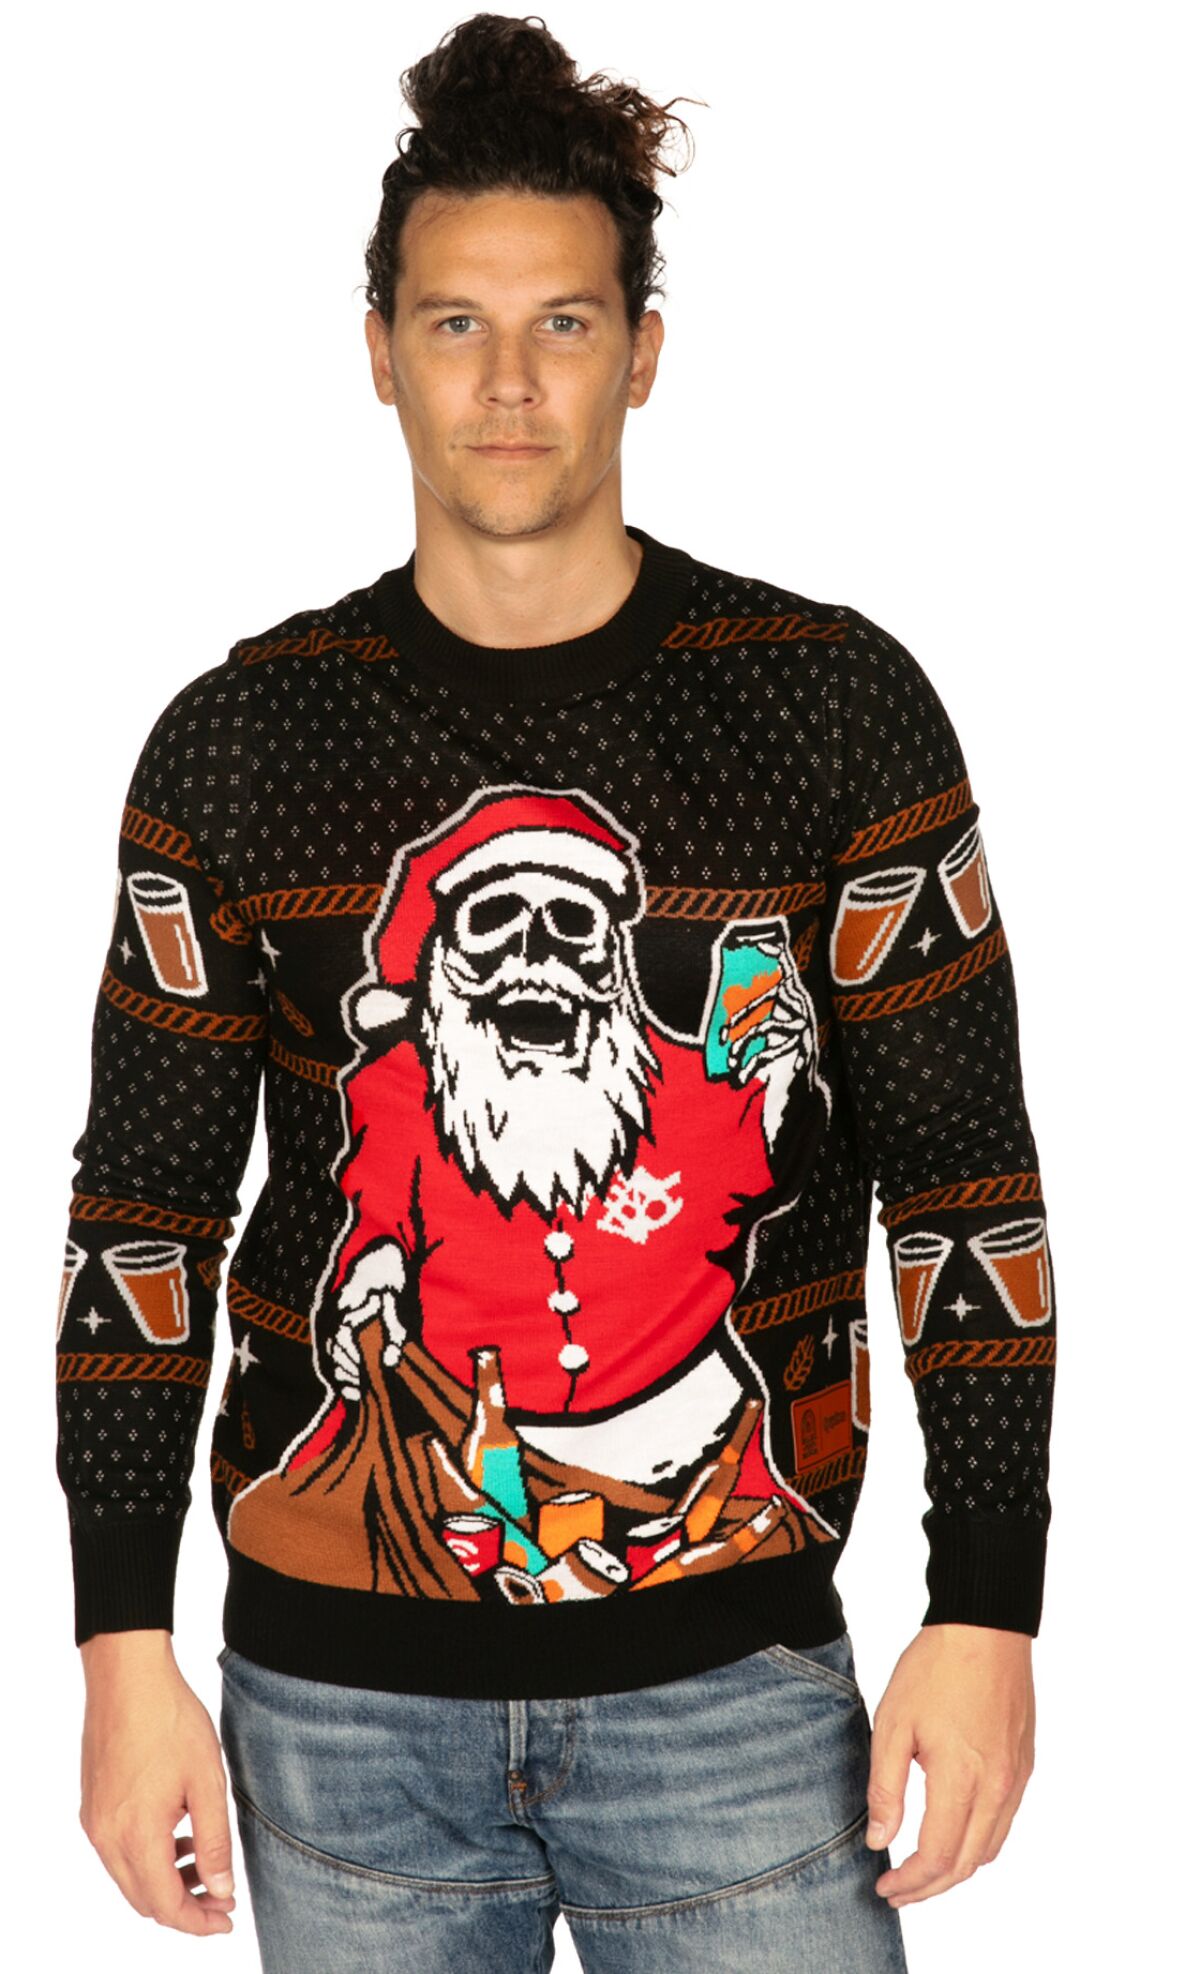 The Ballast Point Ugly Christmas Sweater was made as a collaboration with Tipsy Elves.